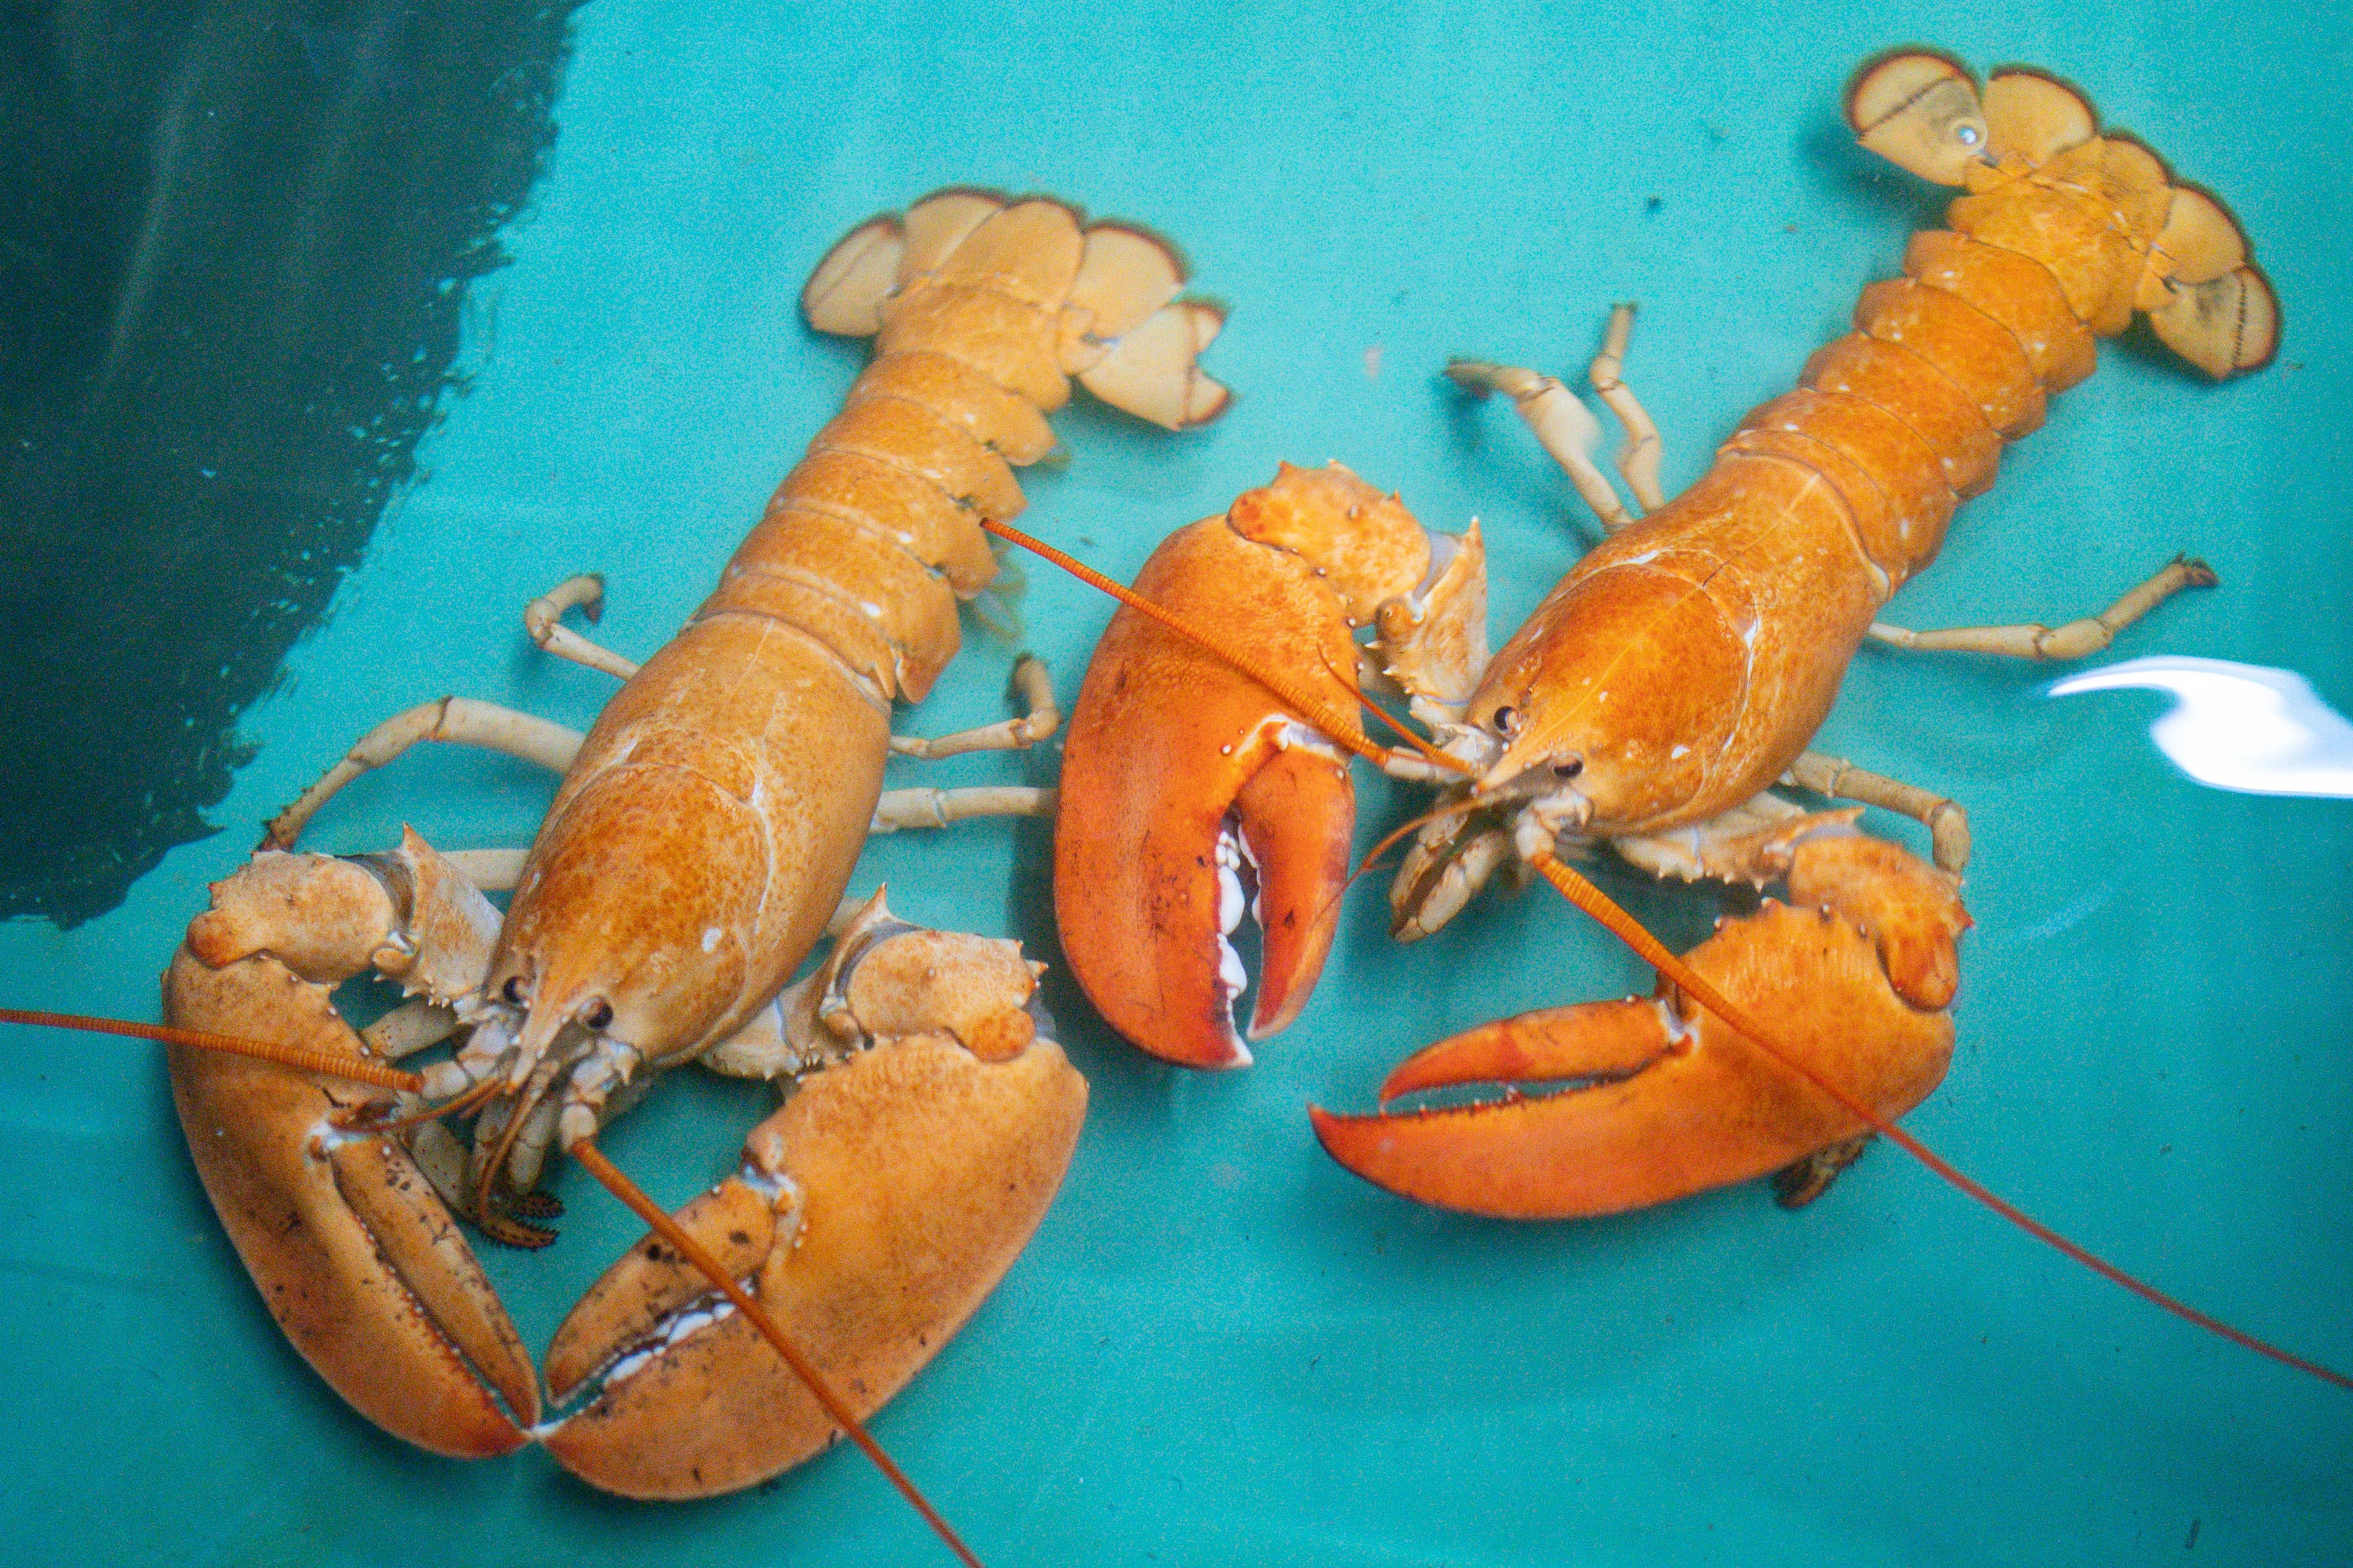 Two rare orange Canadian lobsters settle into their new home at the National SEA LIFE Centre, Birmingham